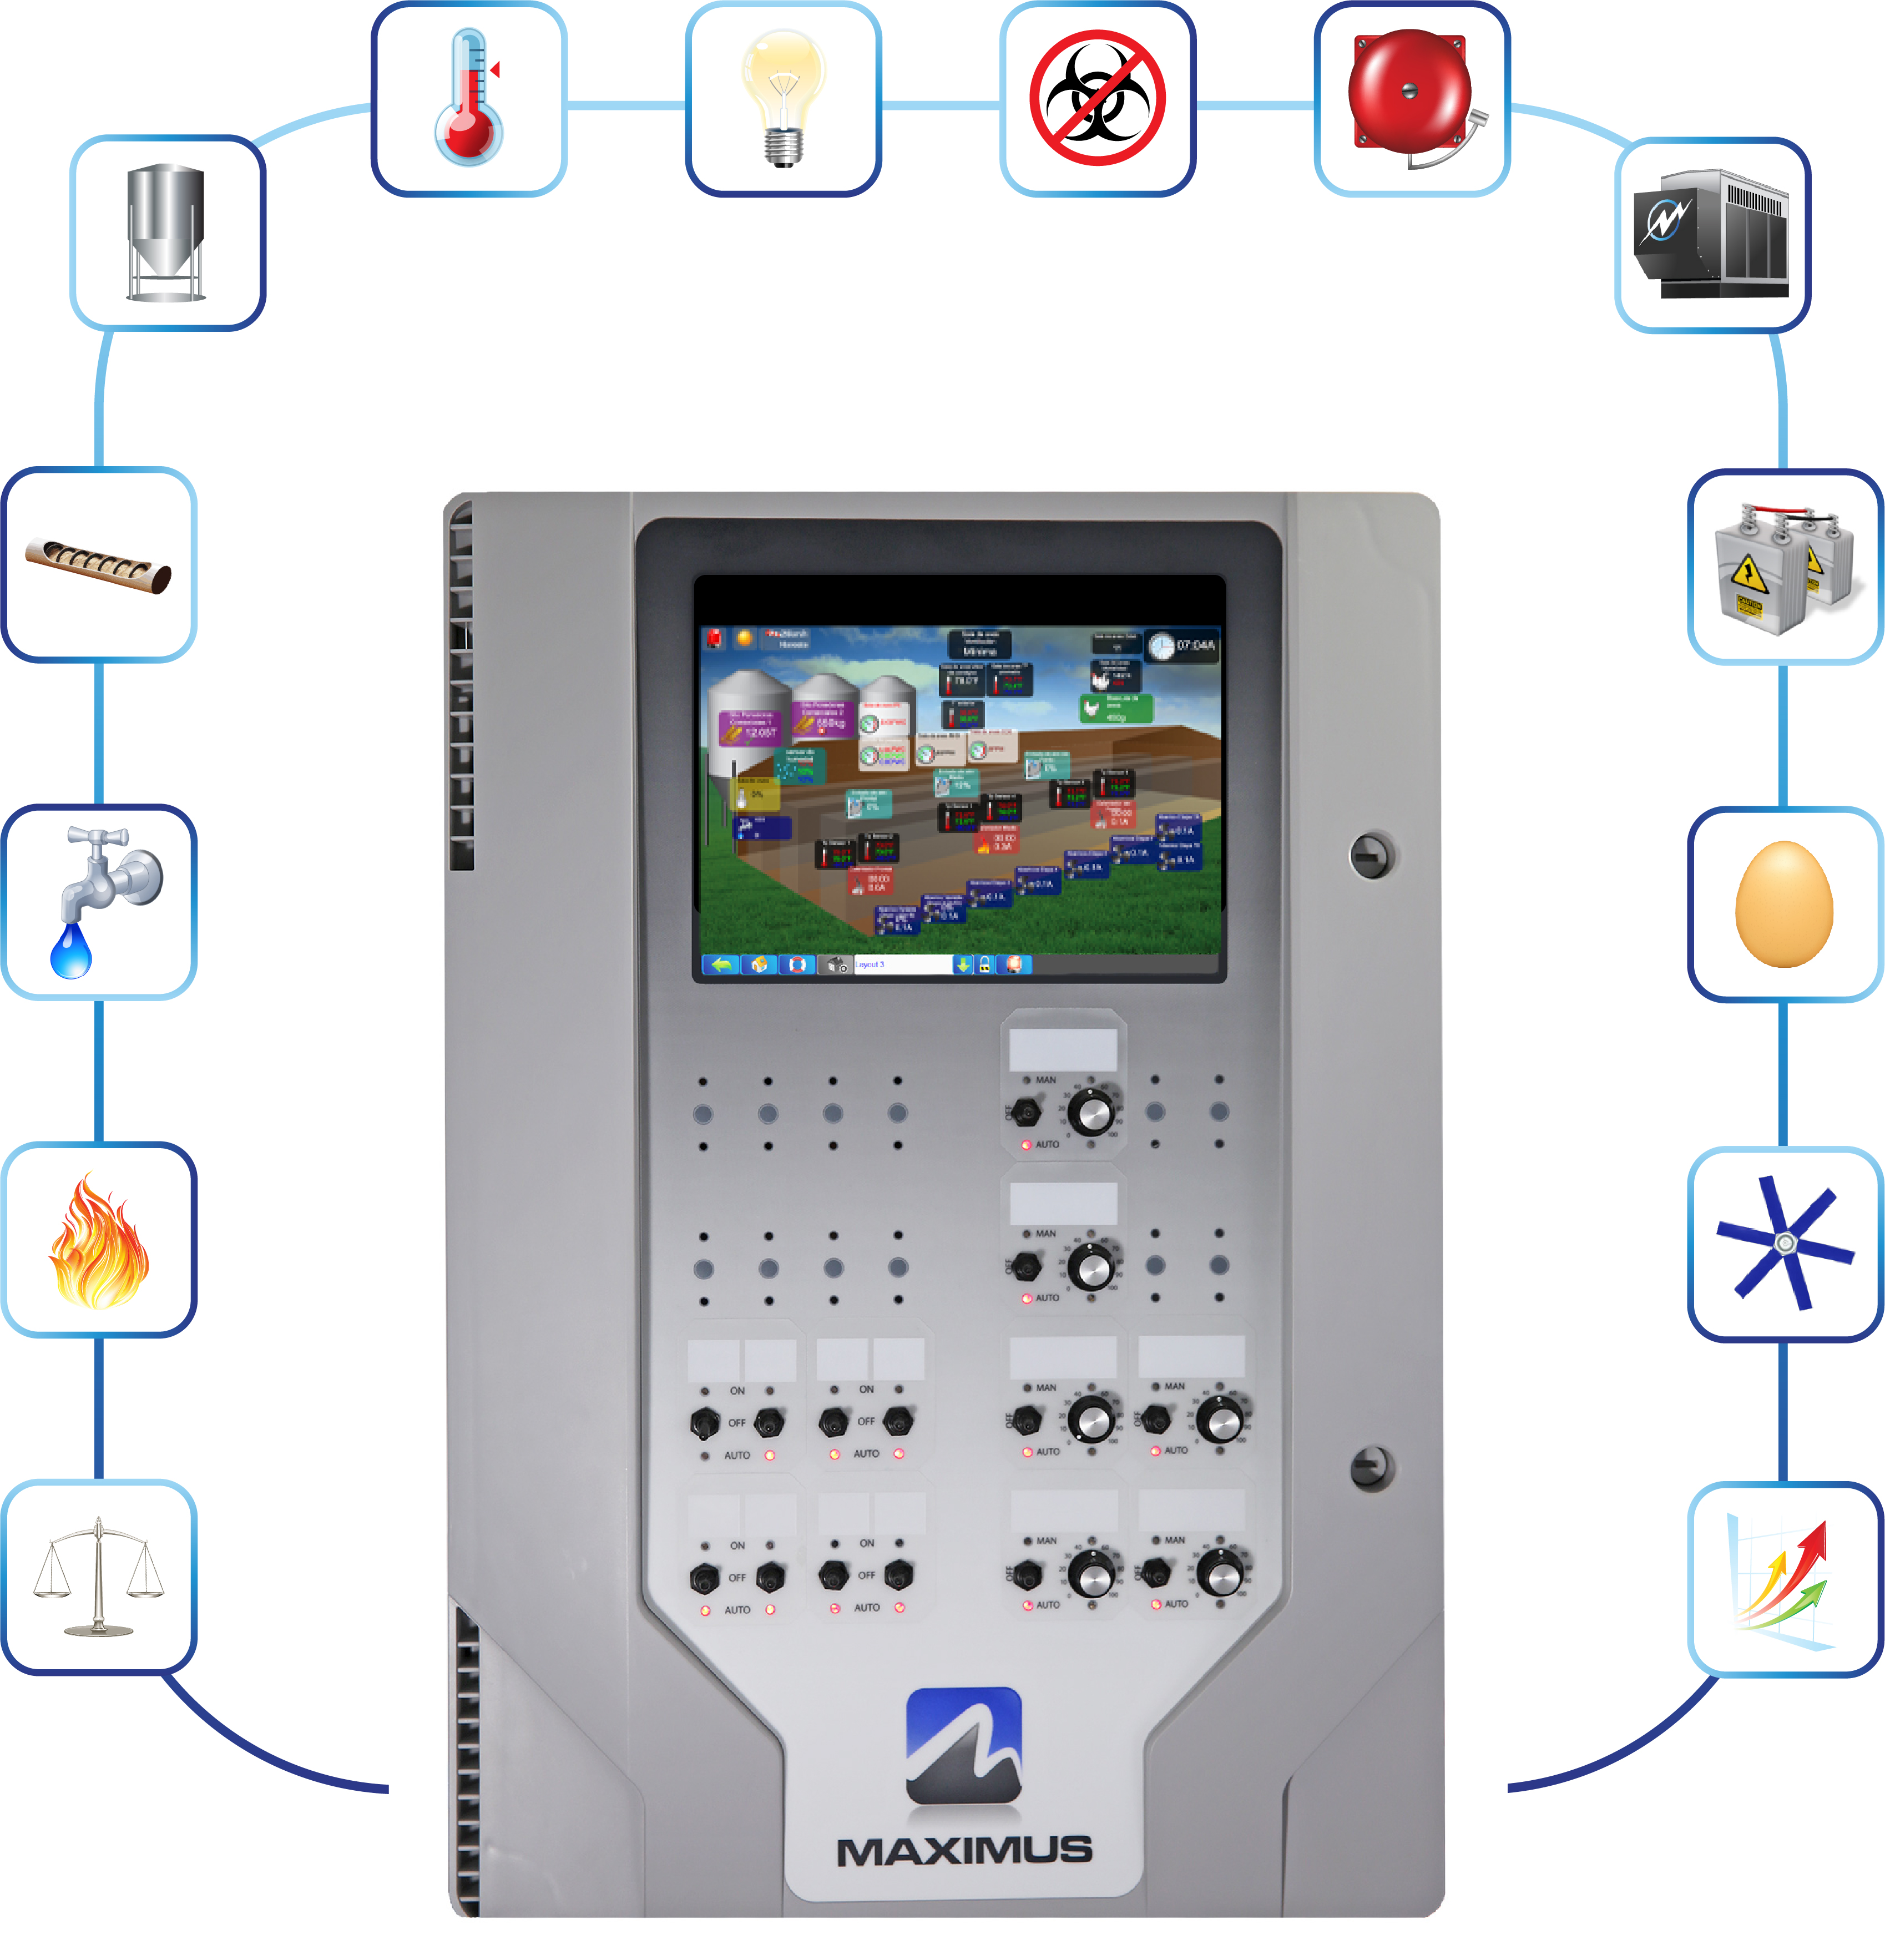 Poultry House Controller - The MAXIMUS controller monitors the poultry house environmental conditions.